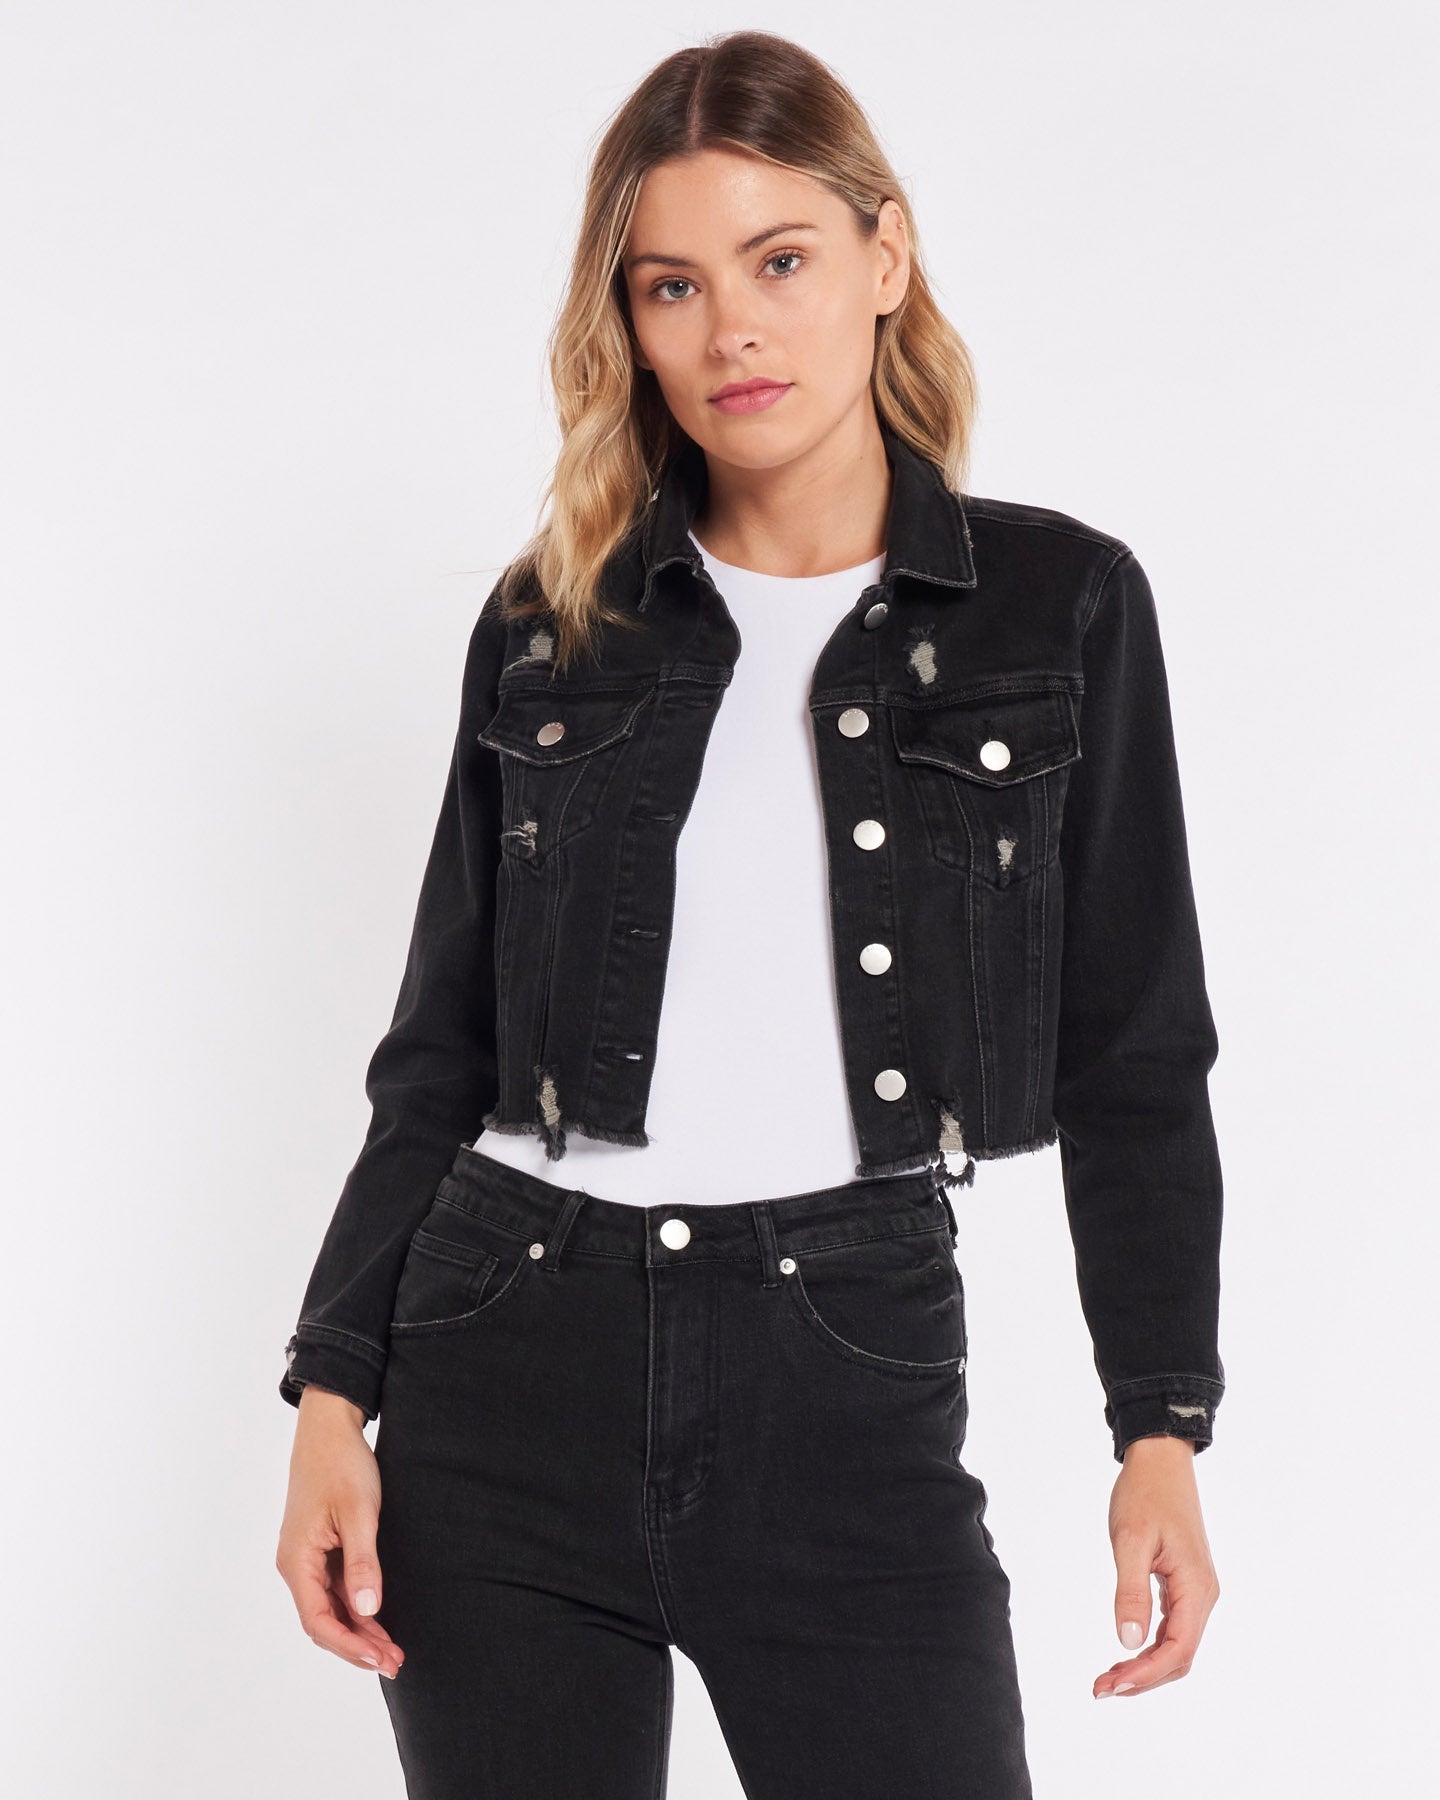 Denim jacket - relaxed cropped fit mid blue - Acne Studios